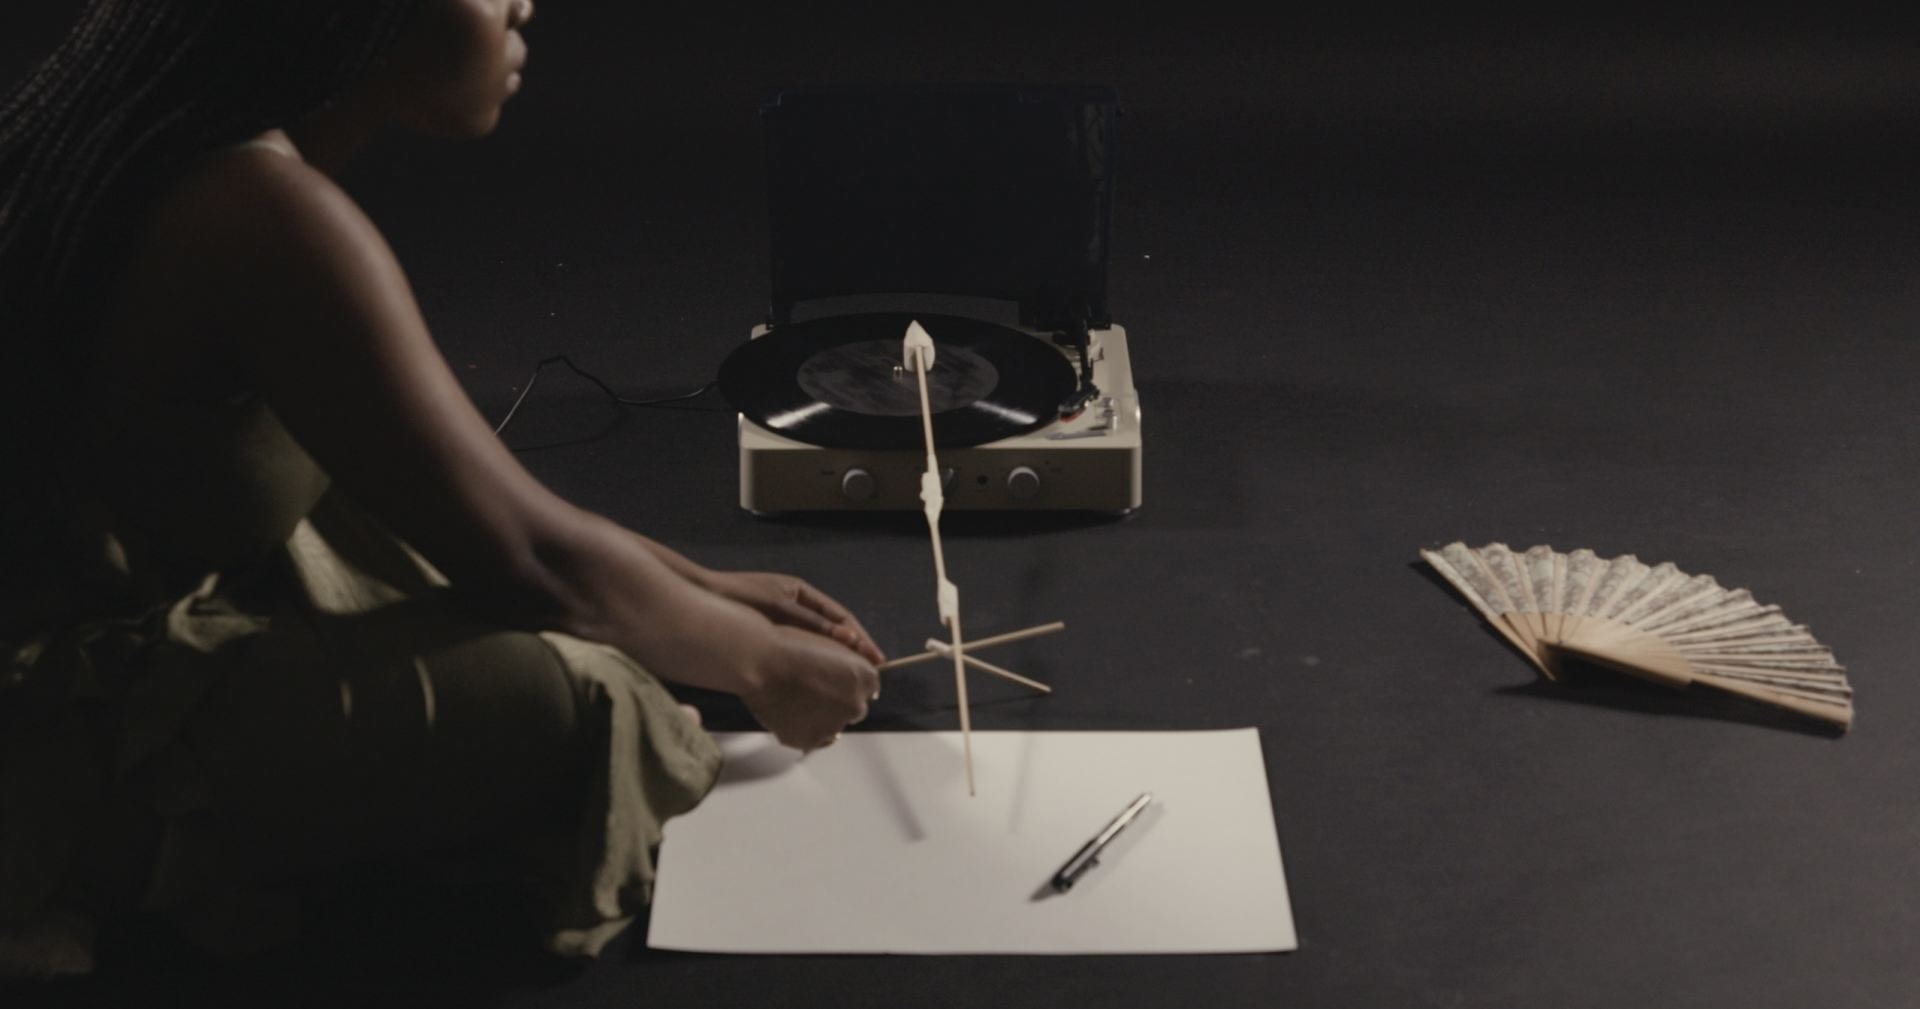 An image of a person sitting cross-legged with an elaborate drawing utensil in a dark room.